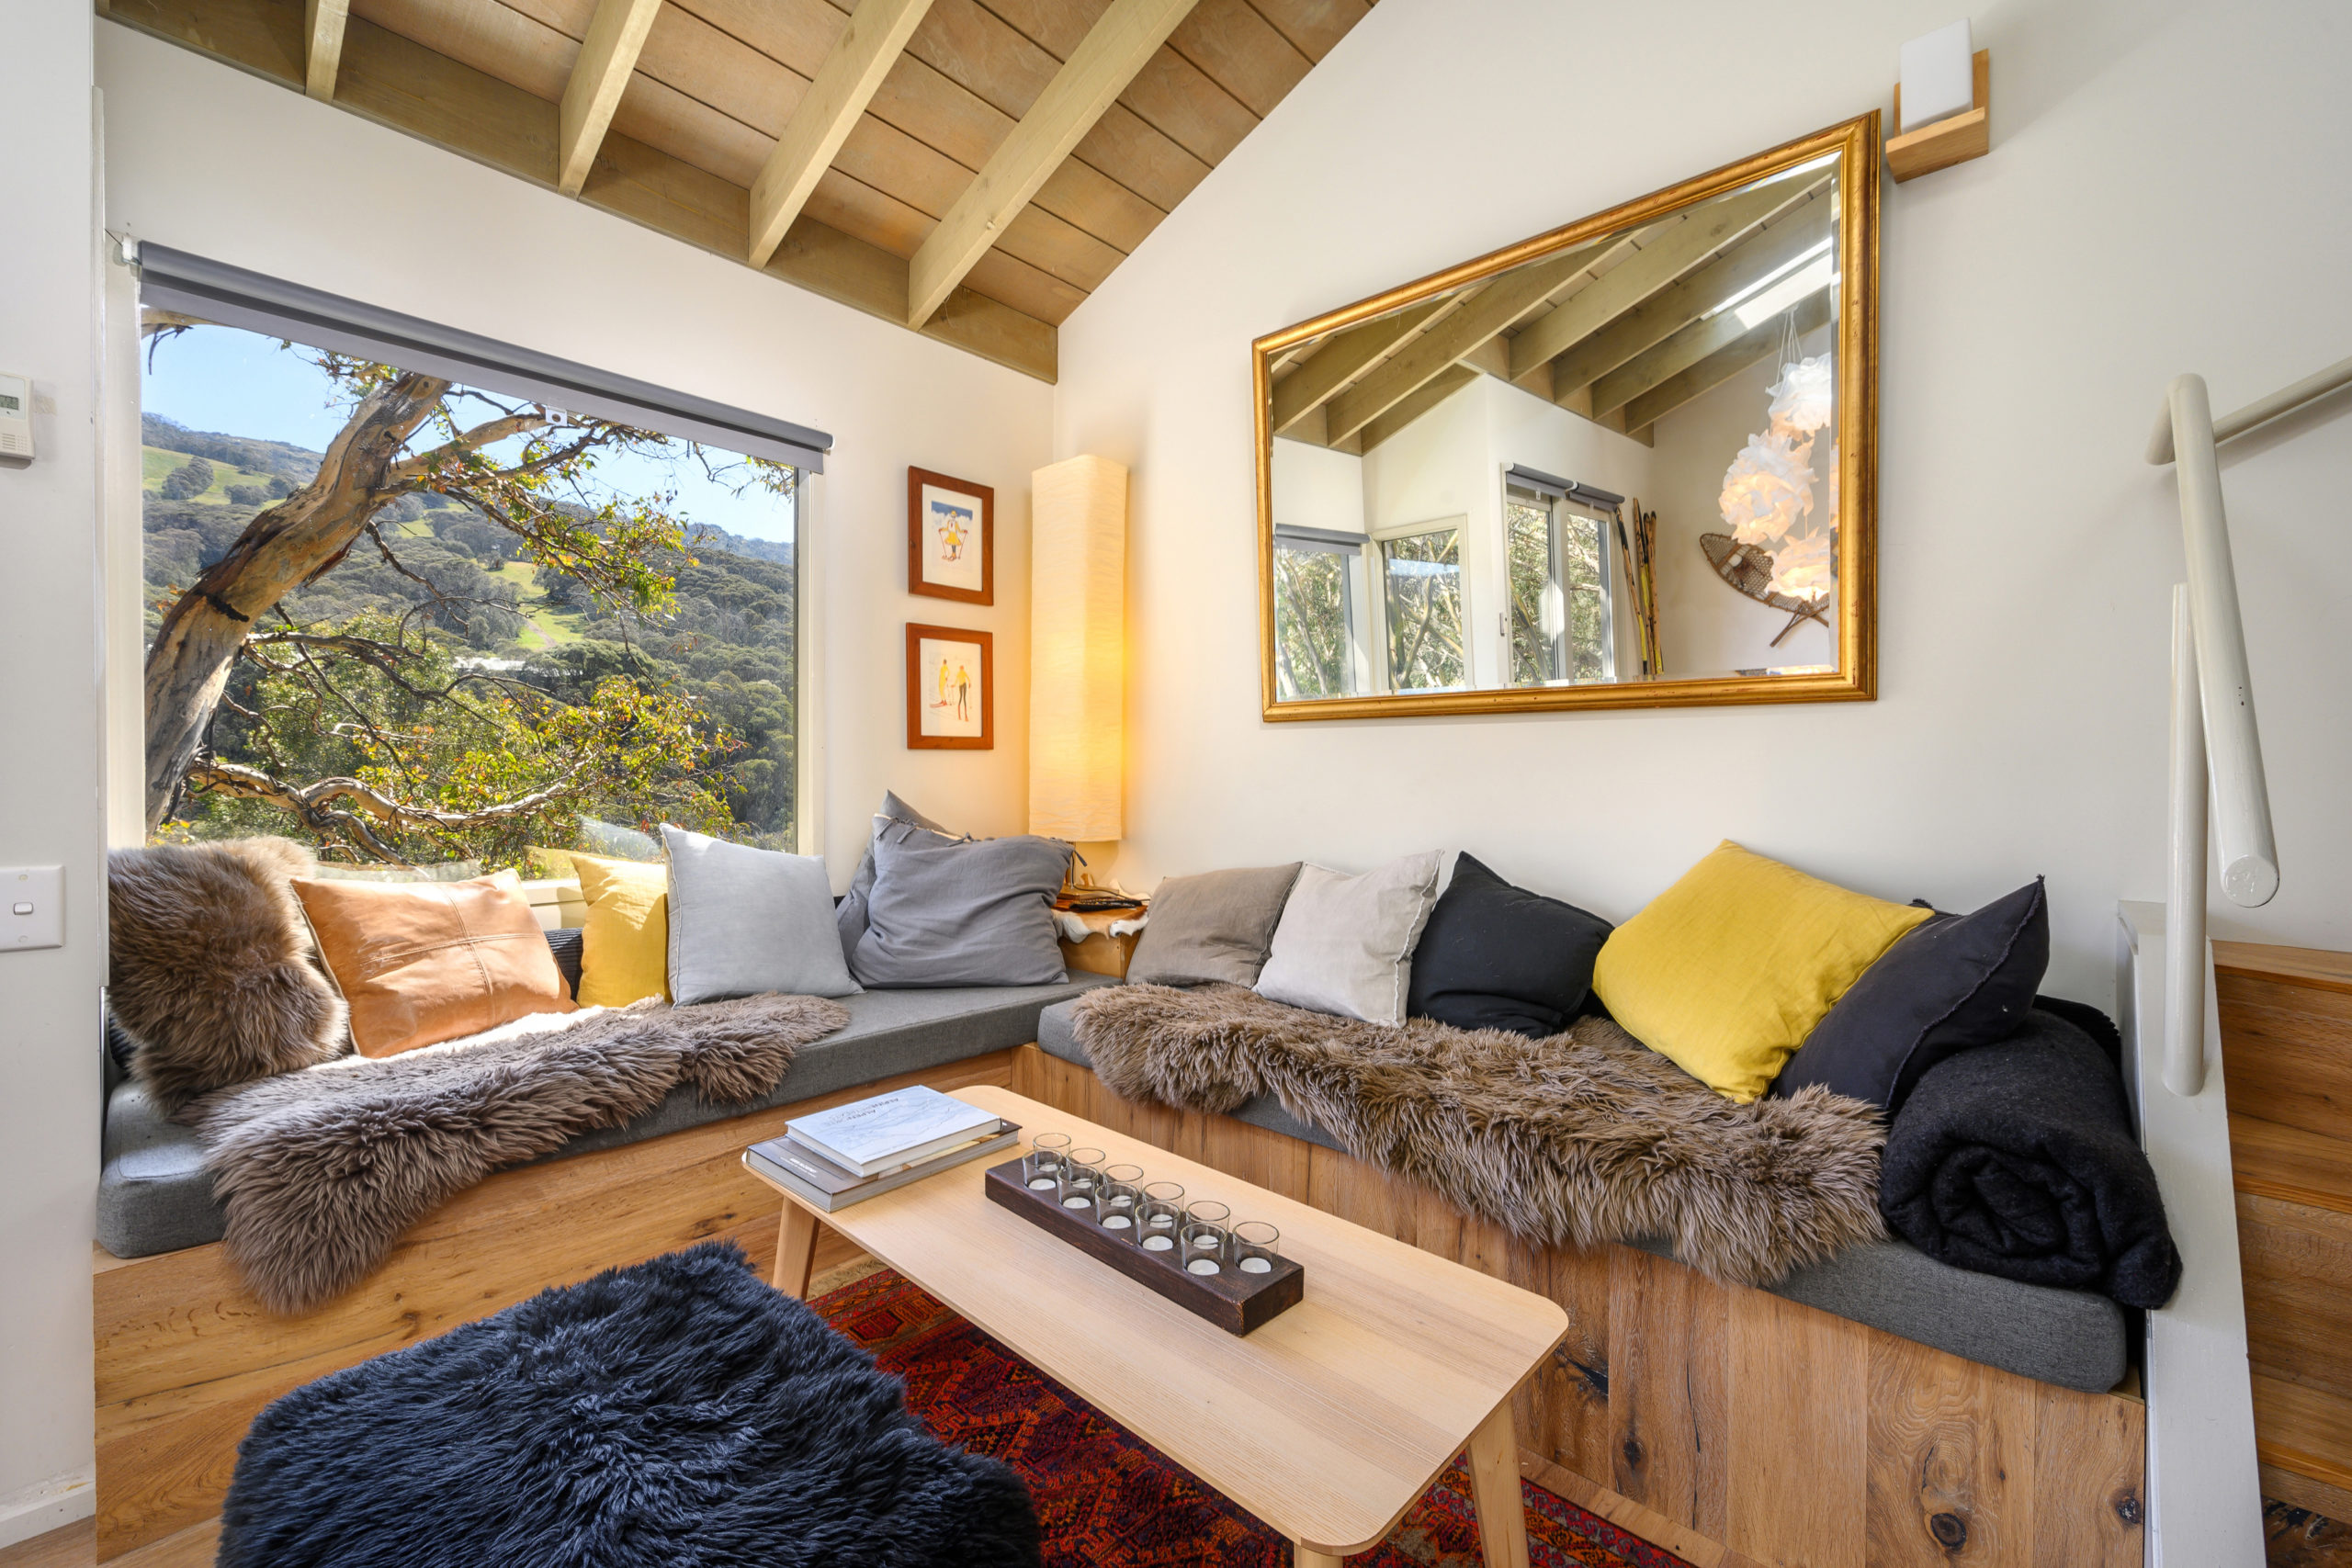 Gorgeous Loft-Style Cabin with Mountain Views – $400,000